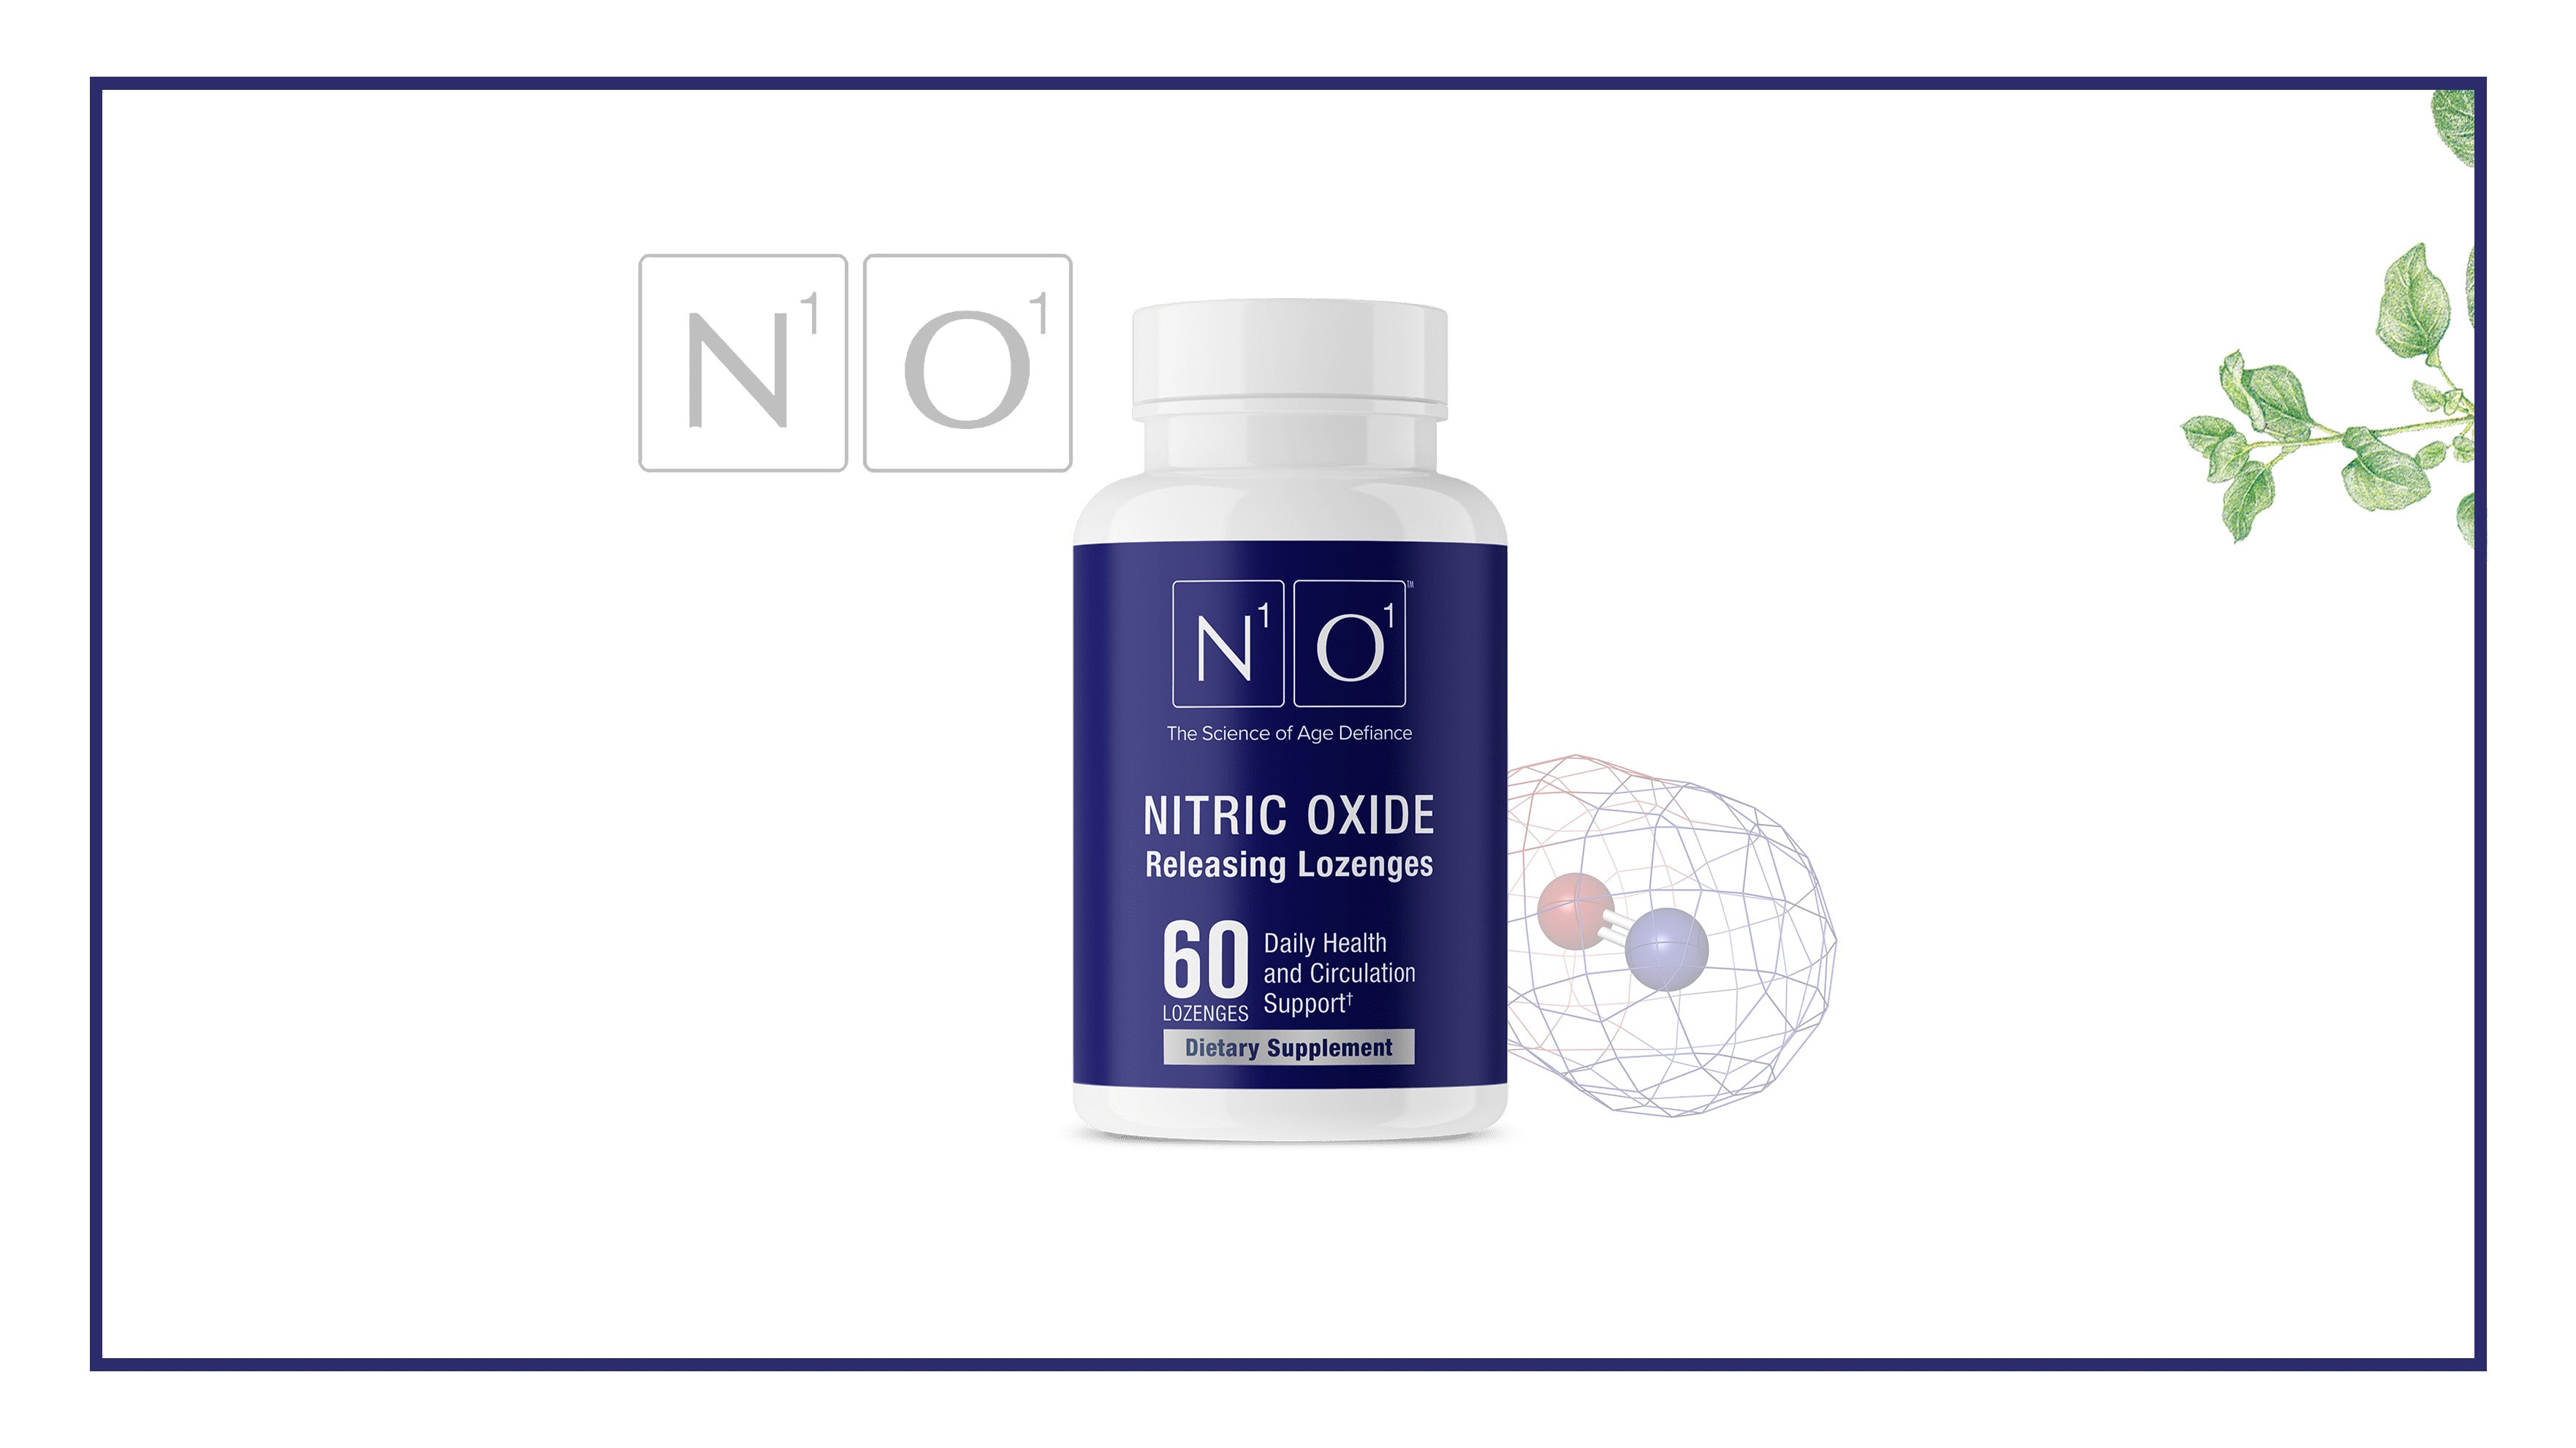 Guide to Taking Nitric Oxide (N1O1) Lozenges<br>[Free Download]